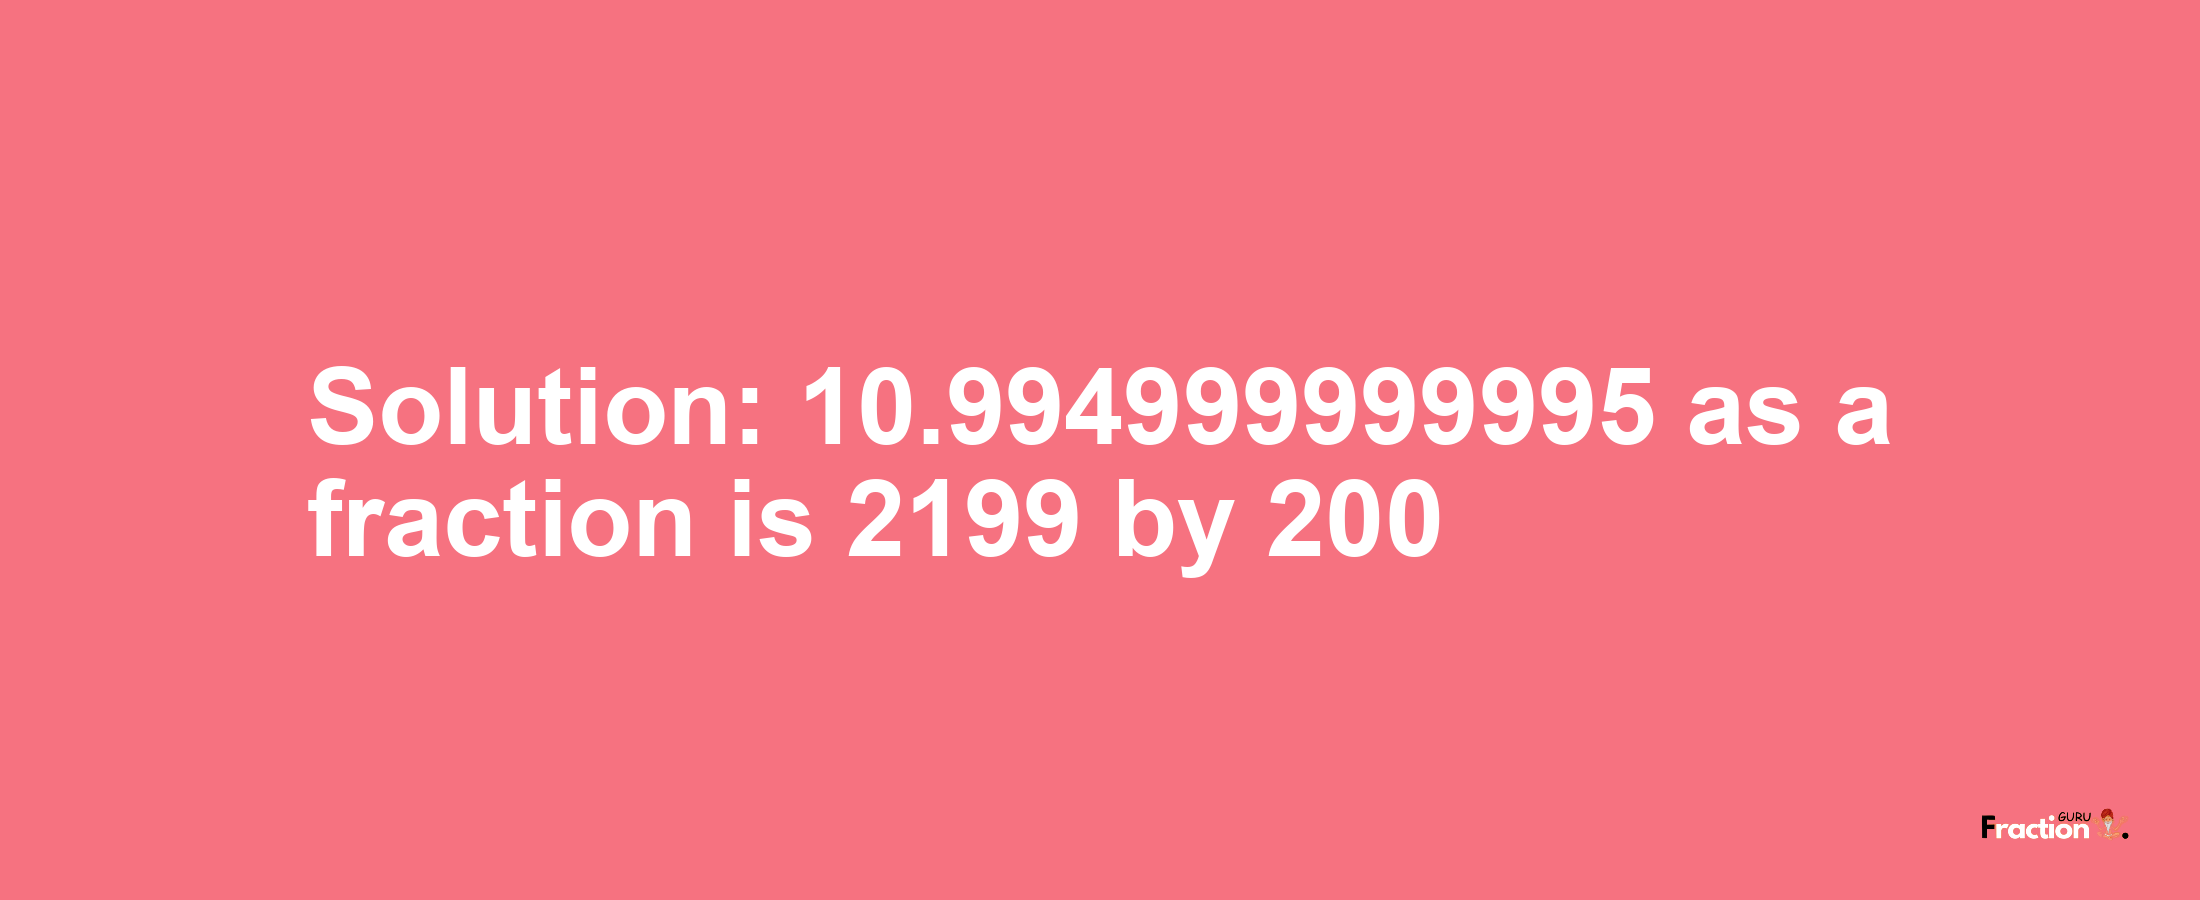 Solution:10.994999999995 as a fraction is 2199/200